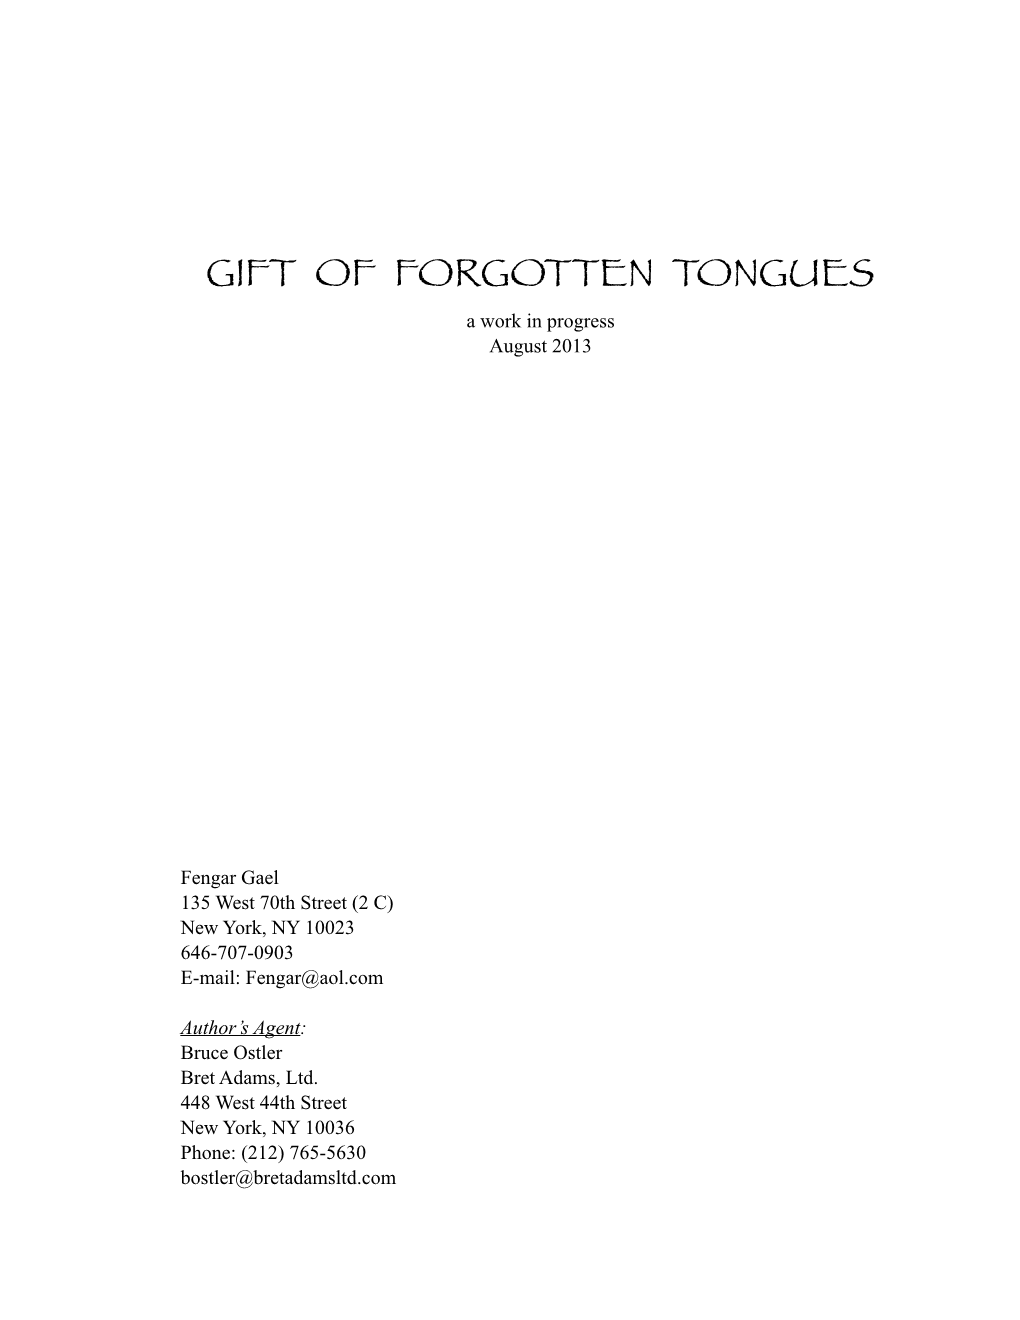 Gift of Forgotten Tongues 5